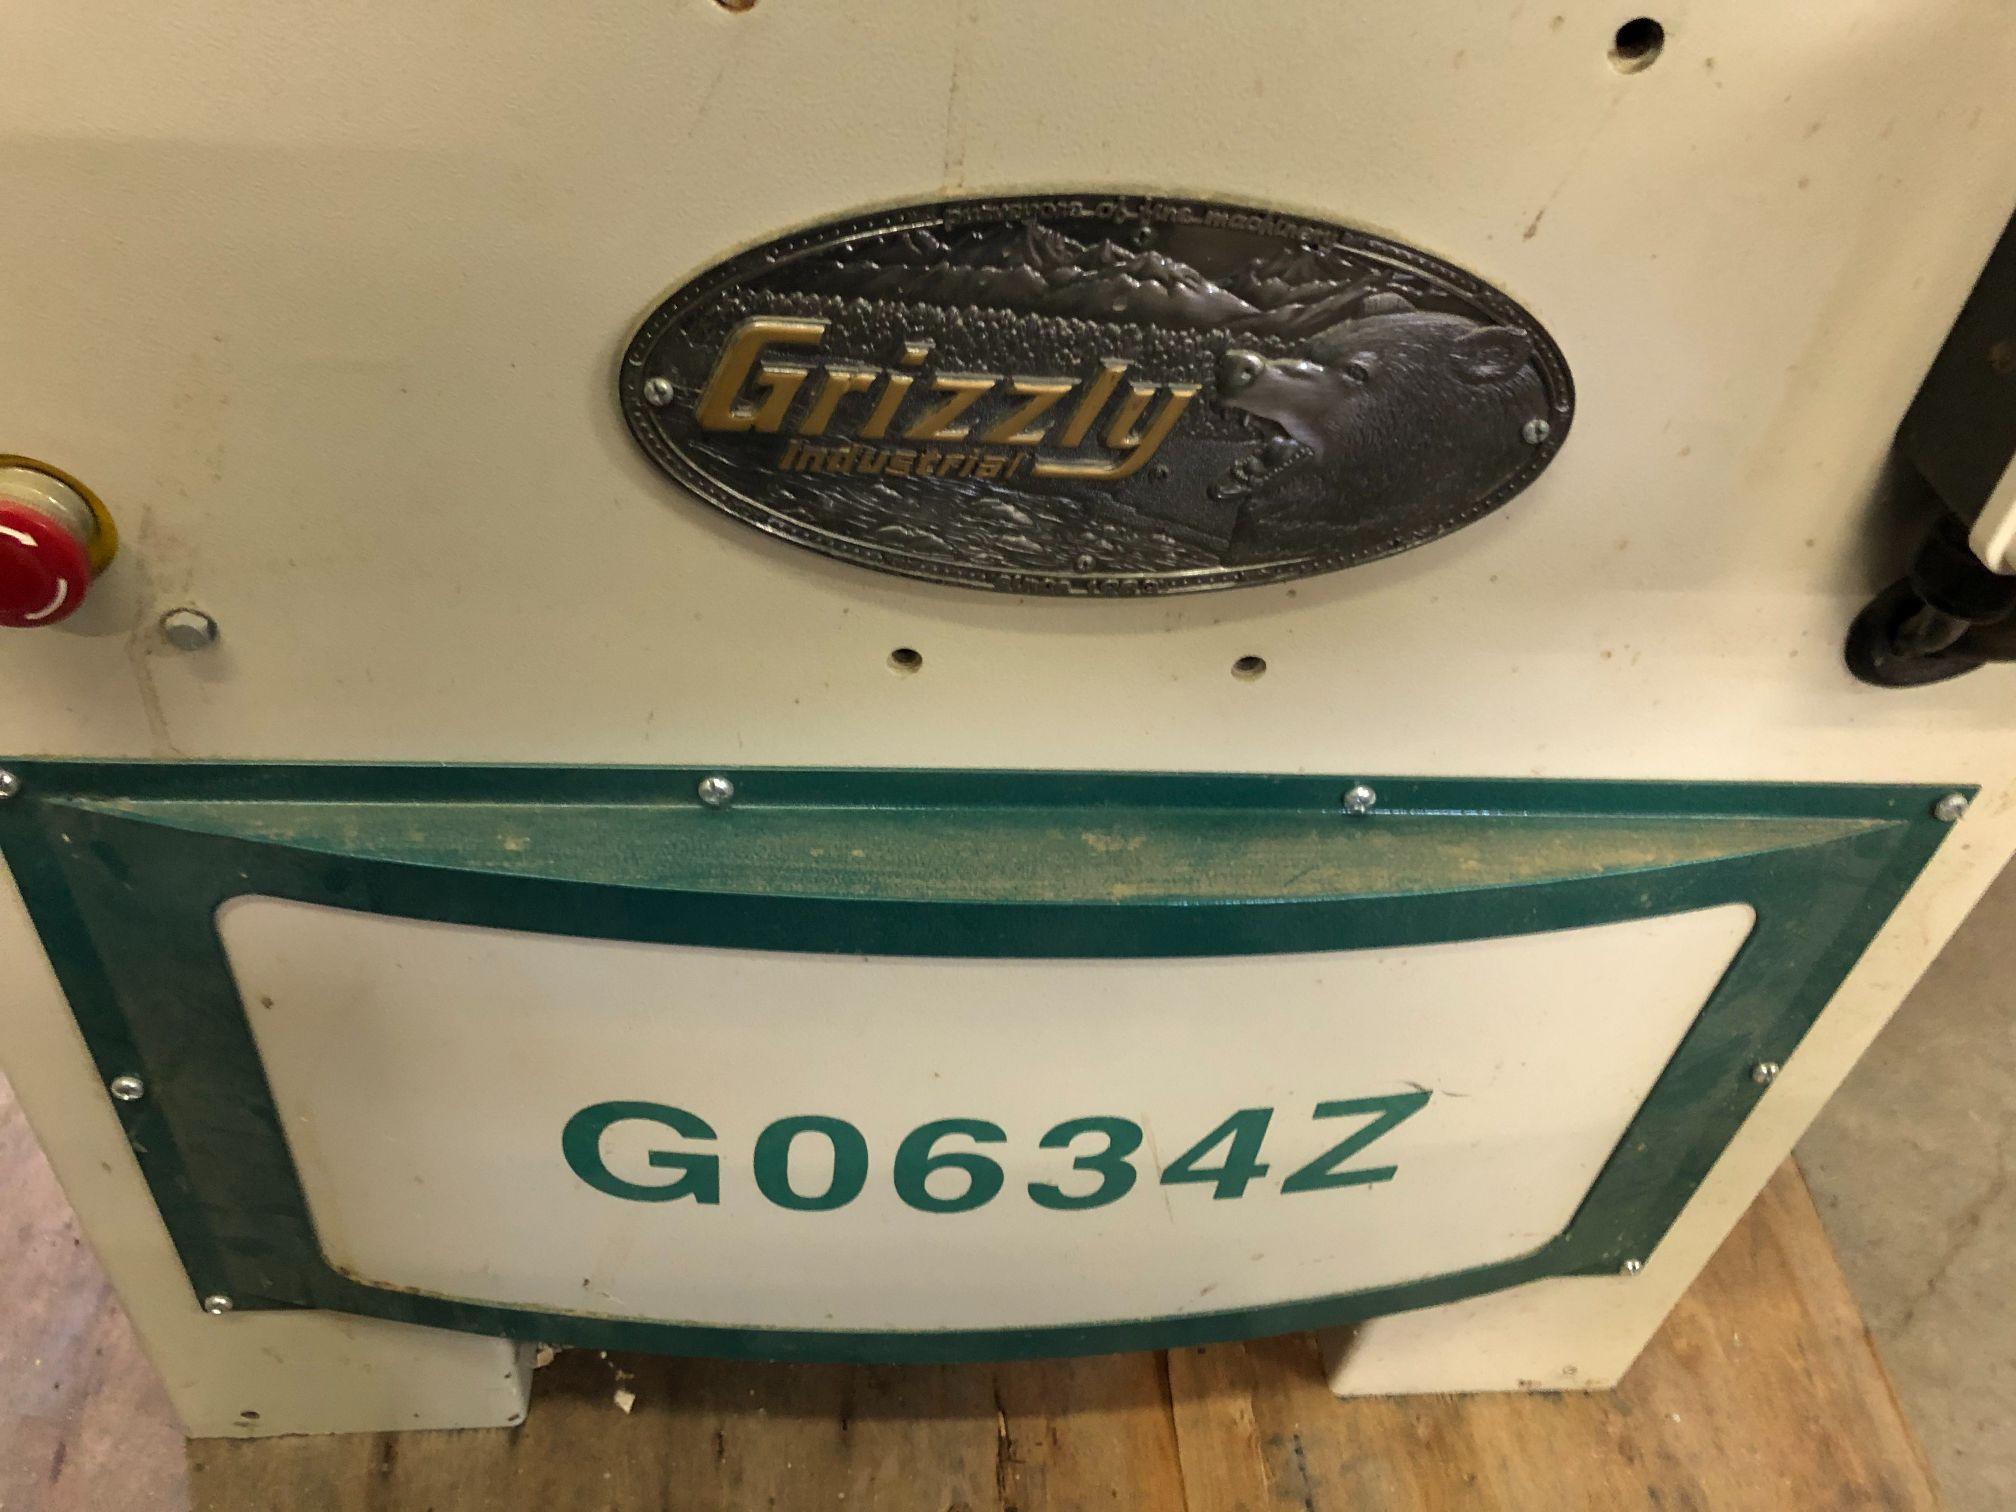 Grizzly Model G0634Z 12" Planer/Jointer